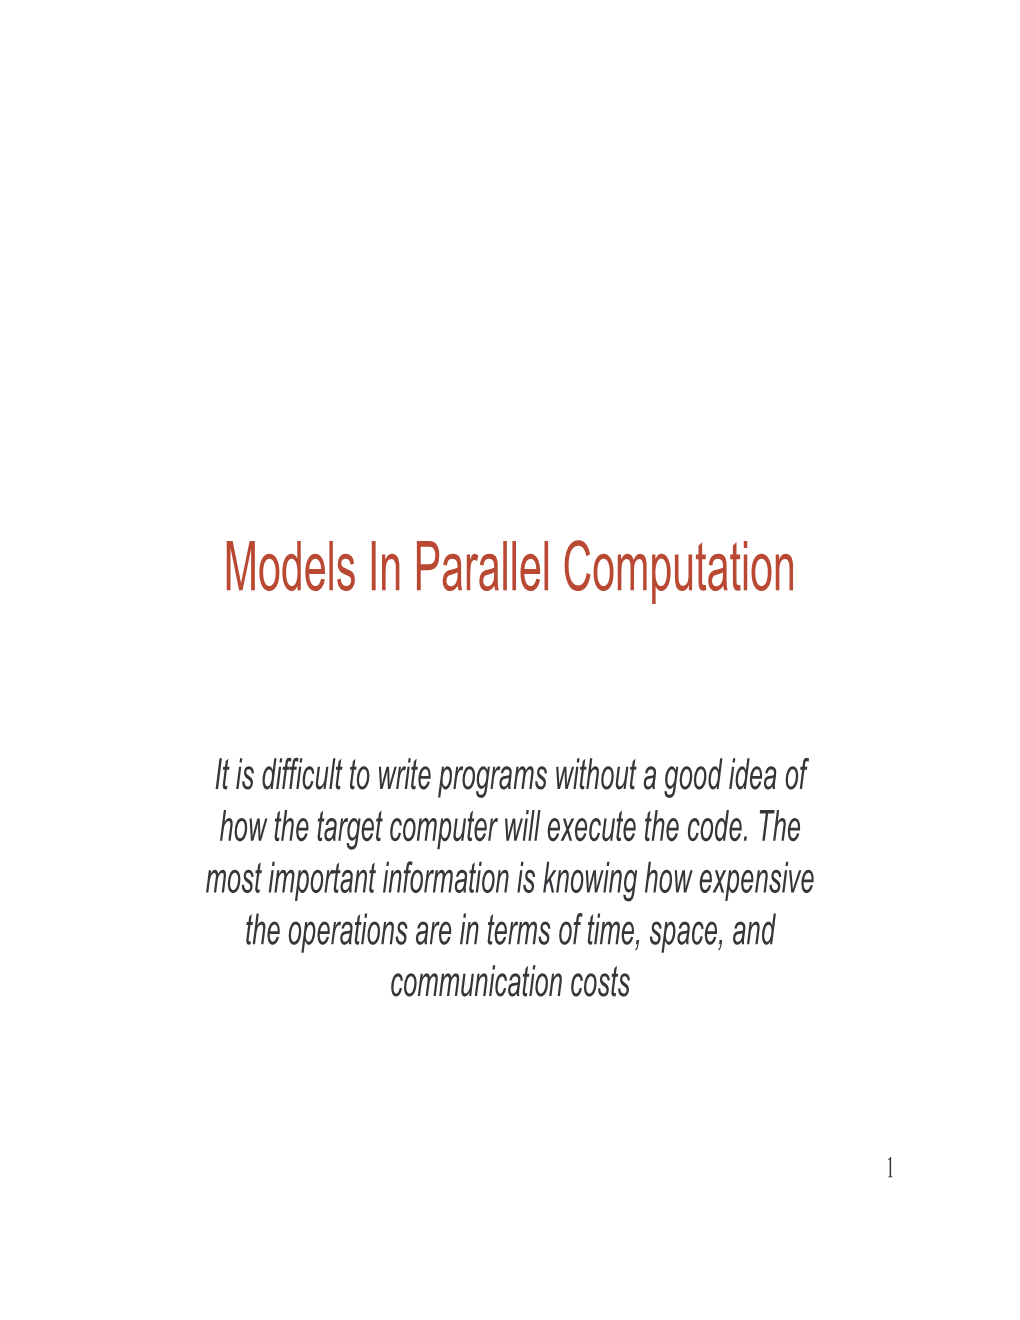 Models in Parallel Computation